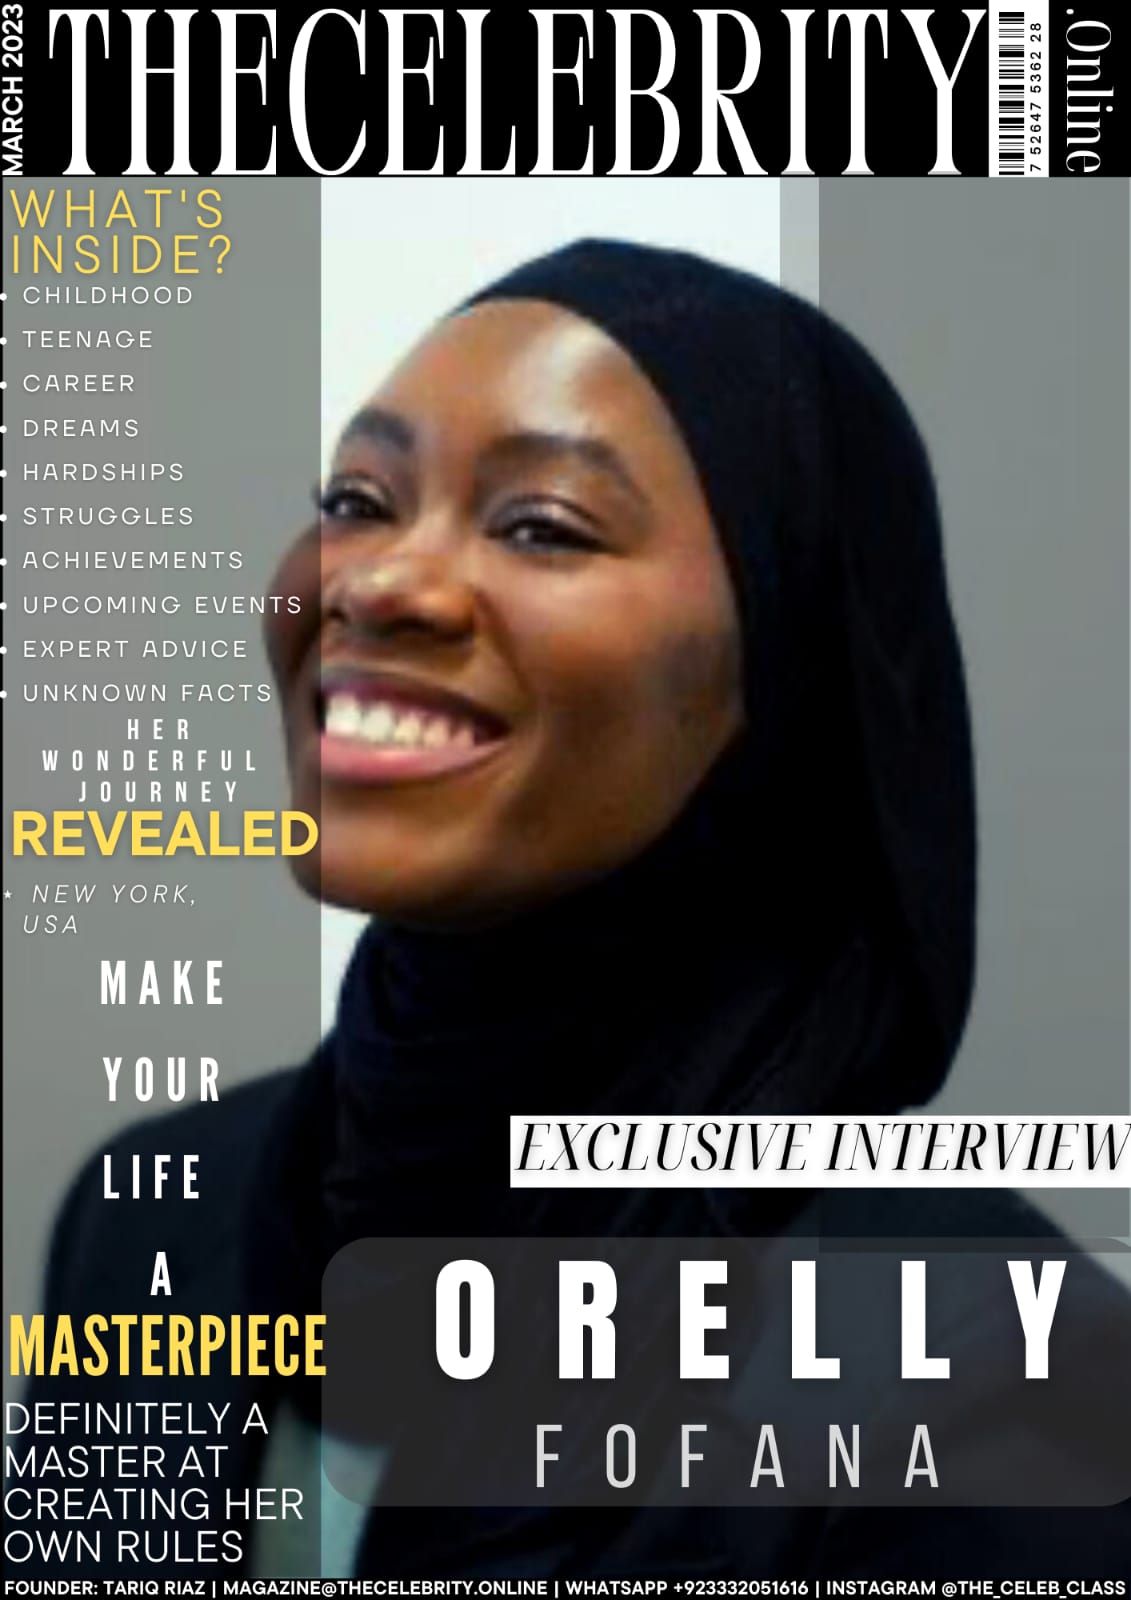 Orelly Fofana Exclusive Interview – ‘Do What You Want& Live Life To The Fullest’